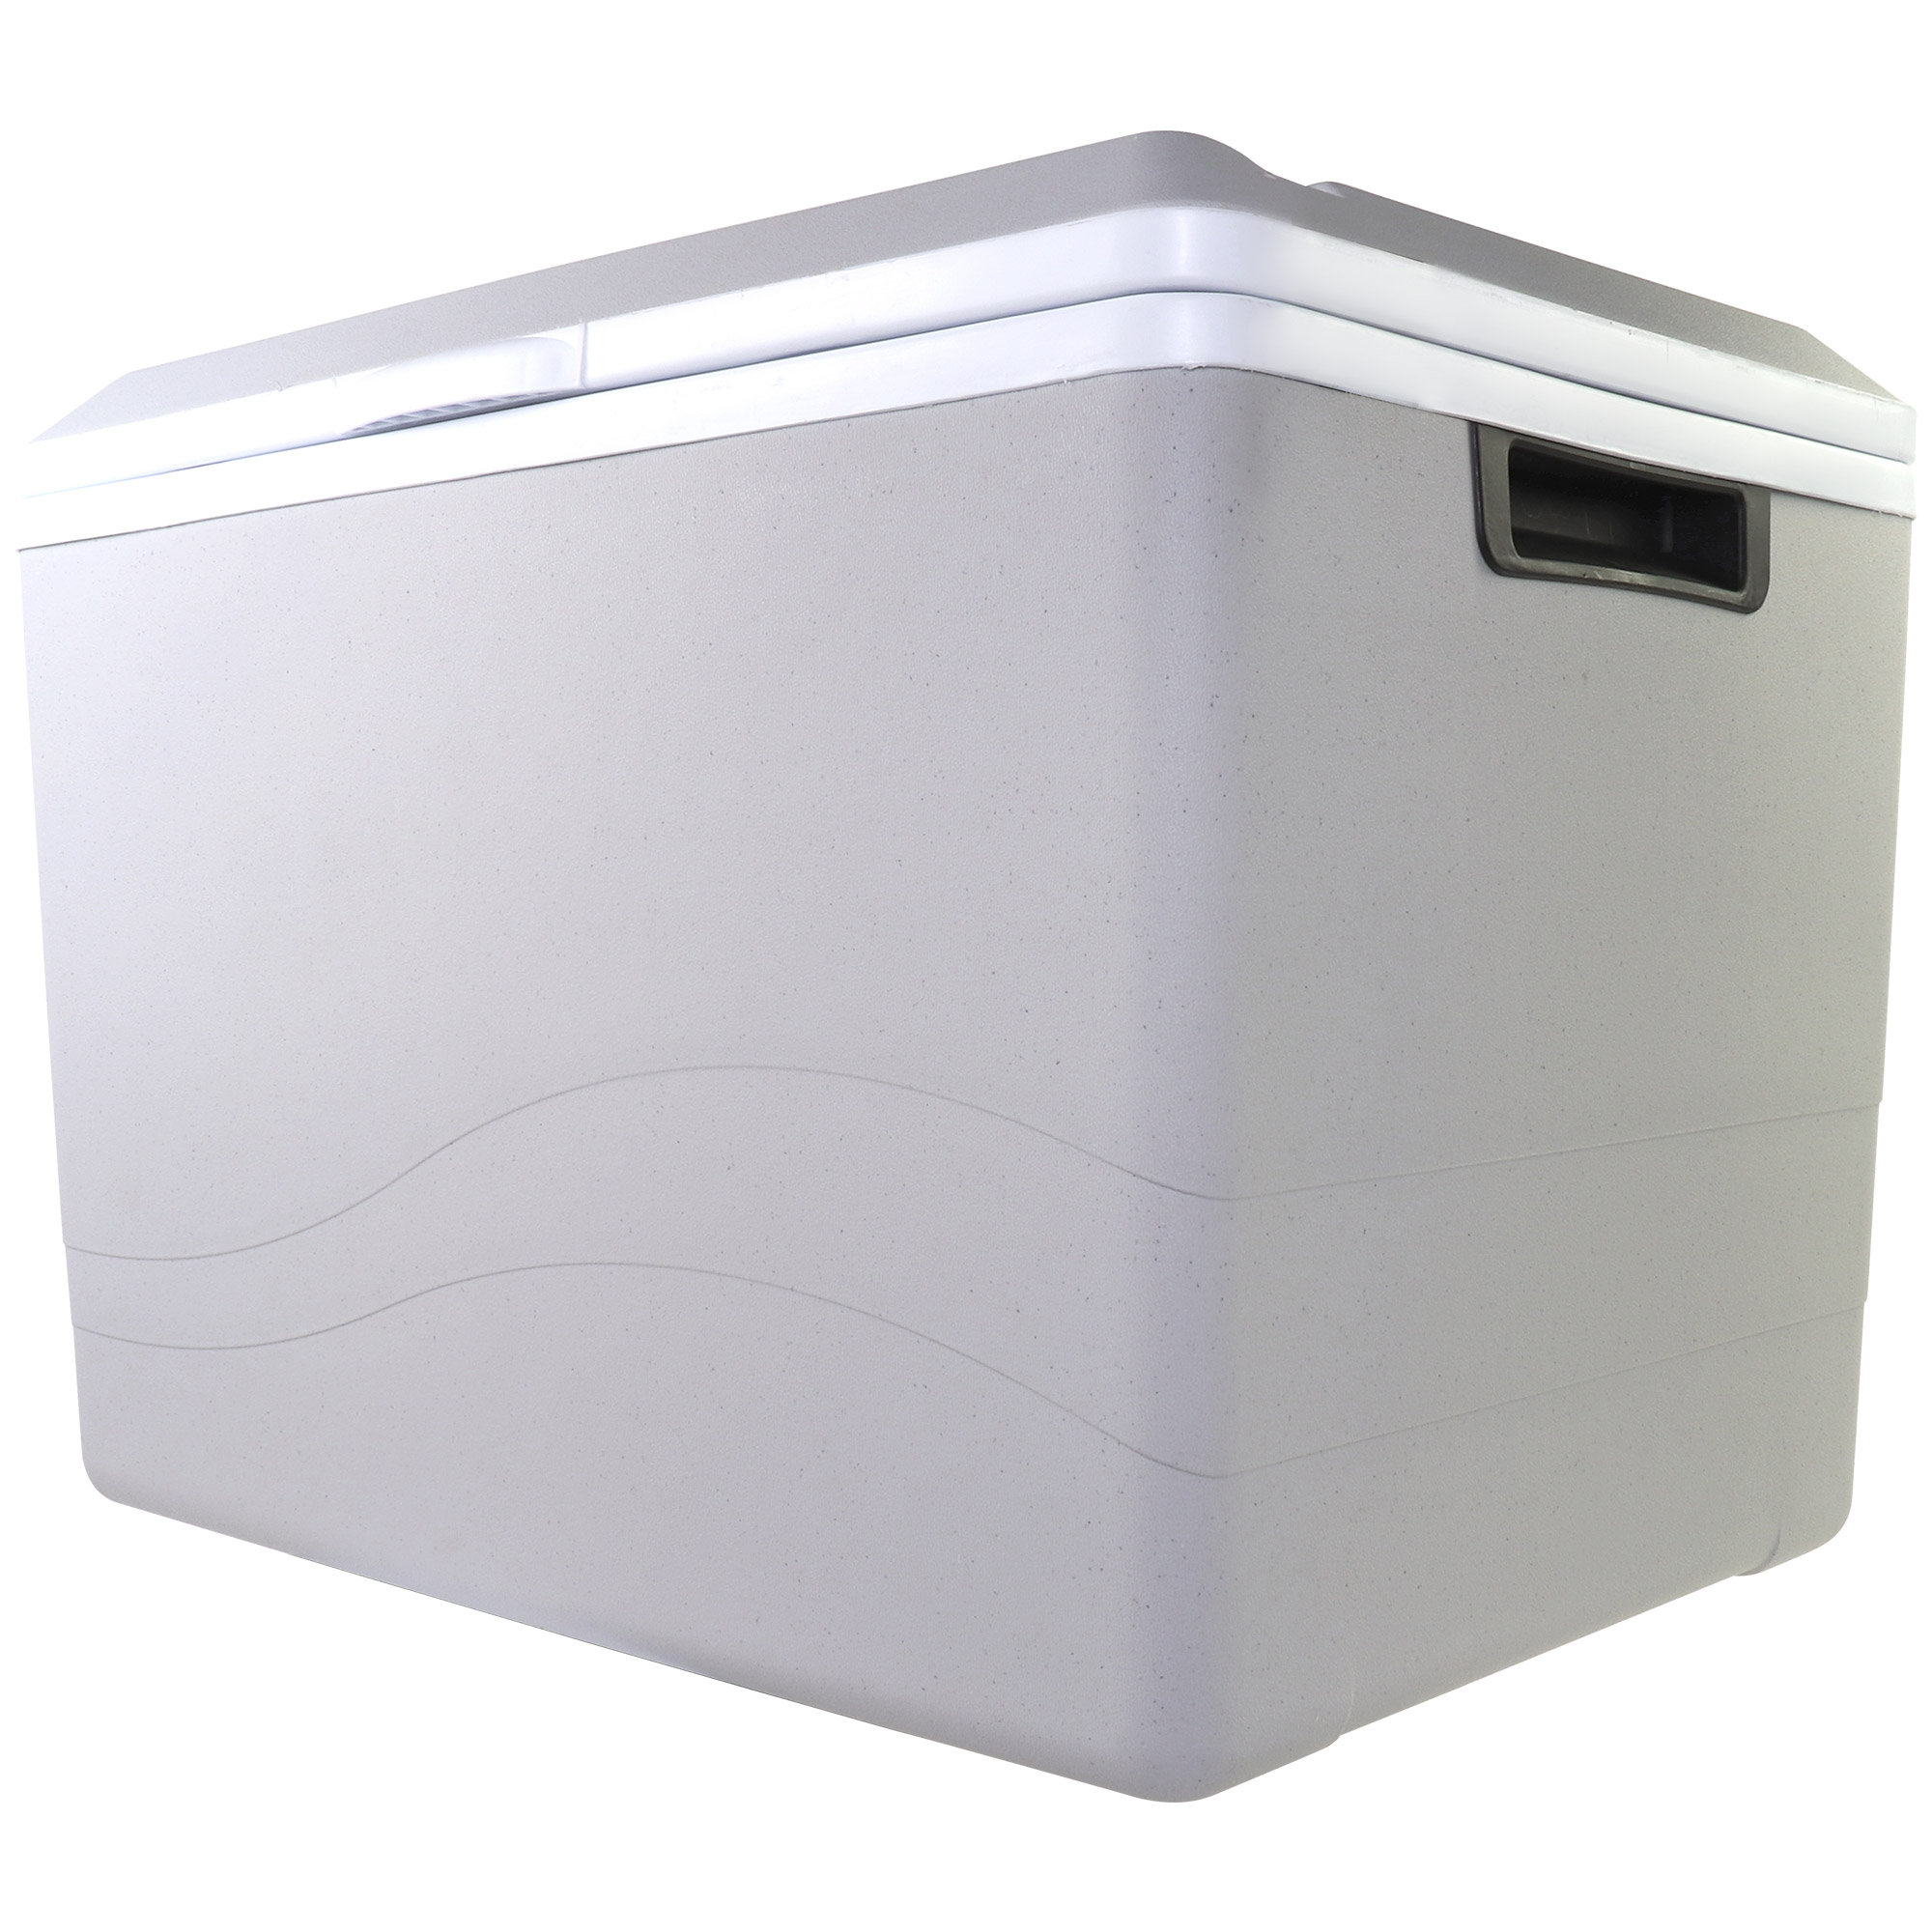 Ivation 24 L Electric Cooler & Warmer Portable Car Fridge with Handle for Camping & Travel